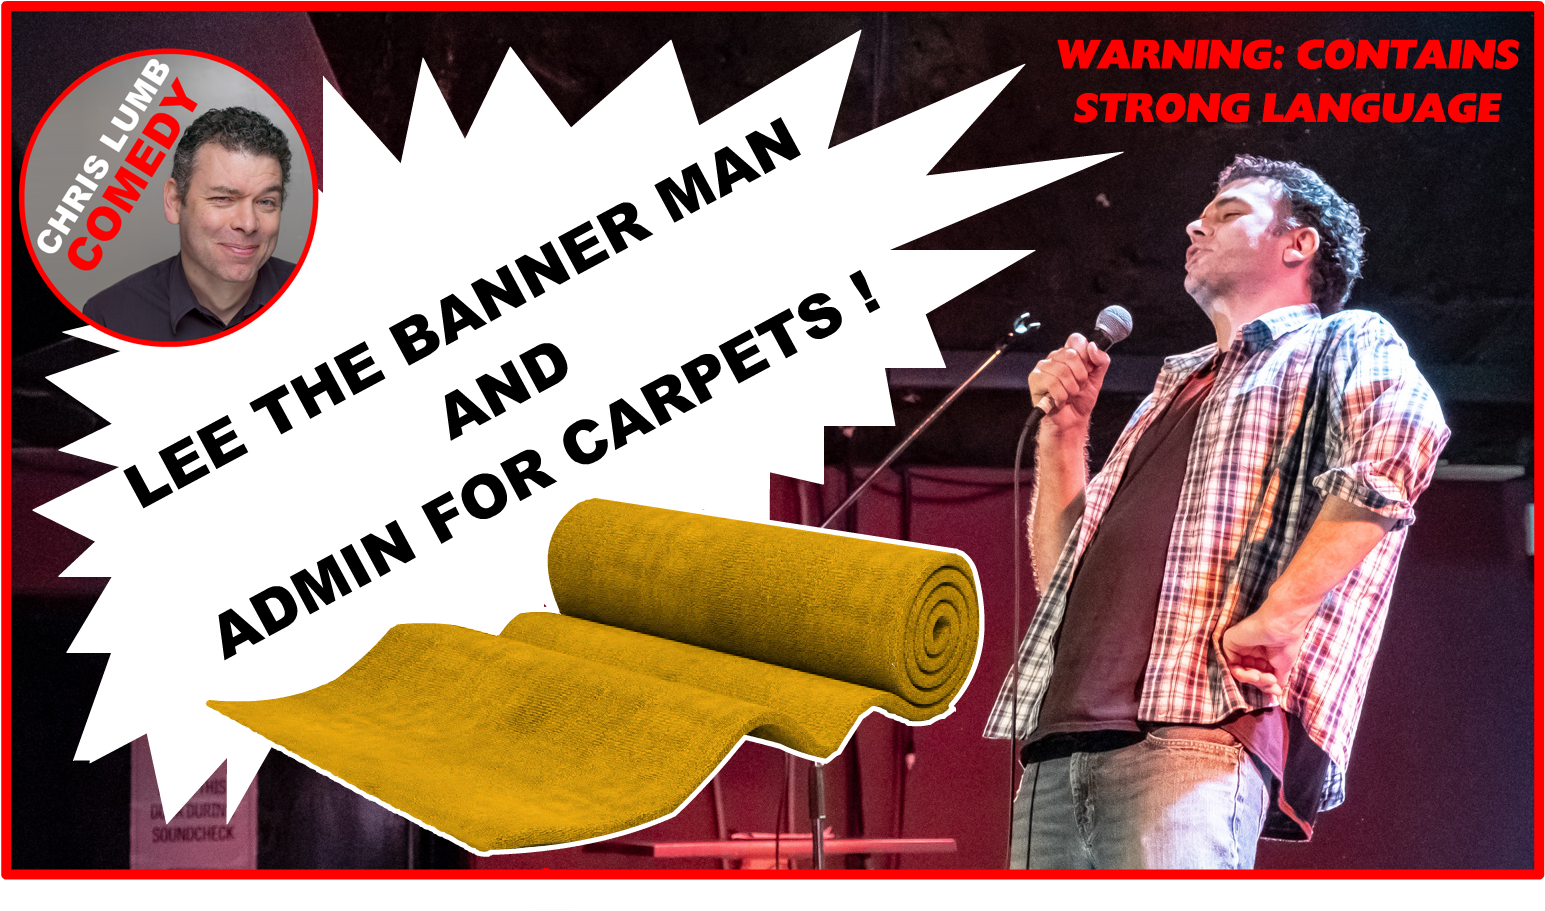 Chris Lumb Comedy "Lee the Banner Man and Admin for Carpets"